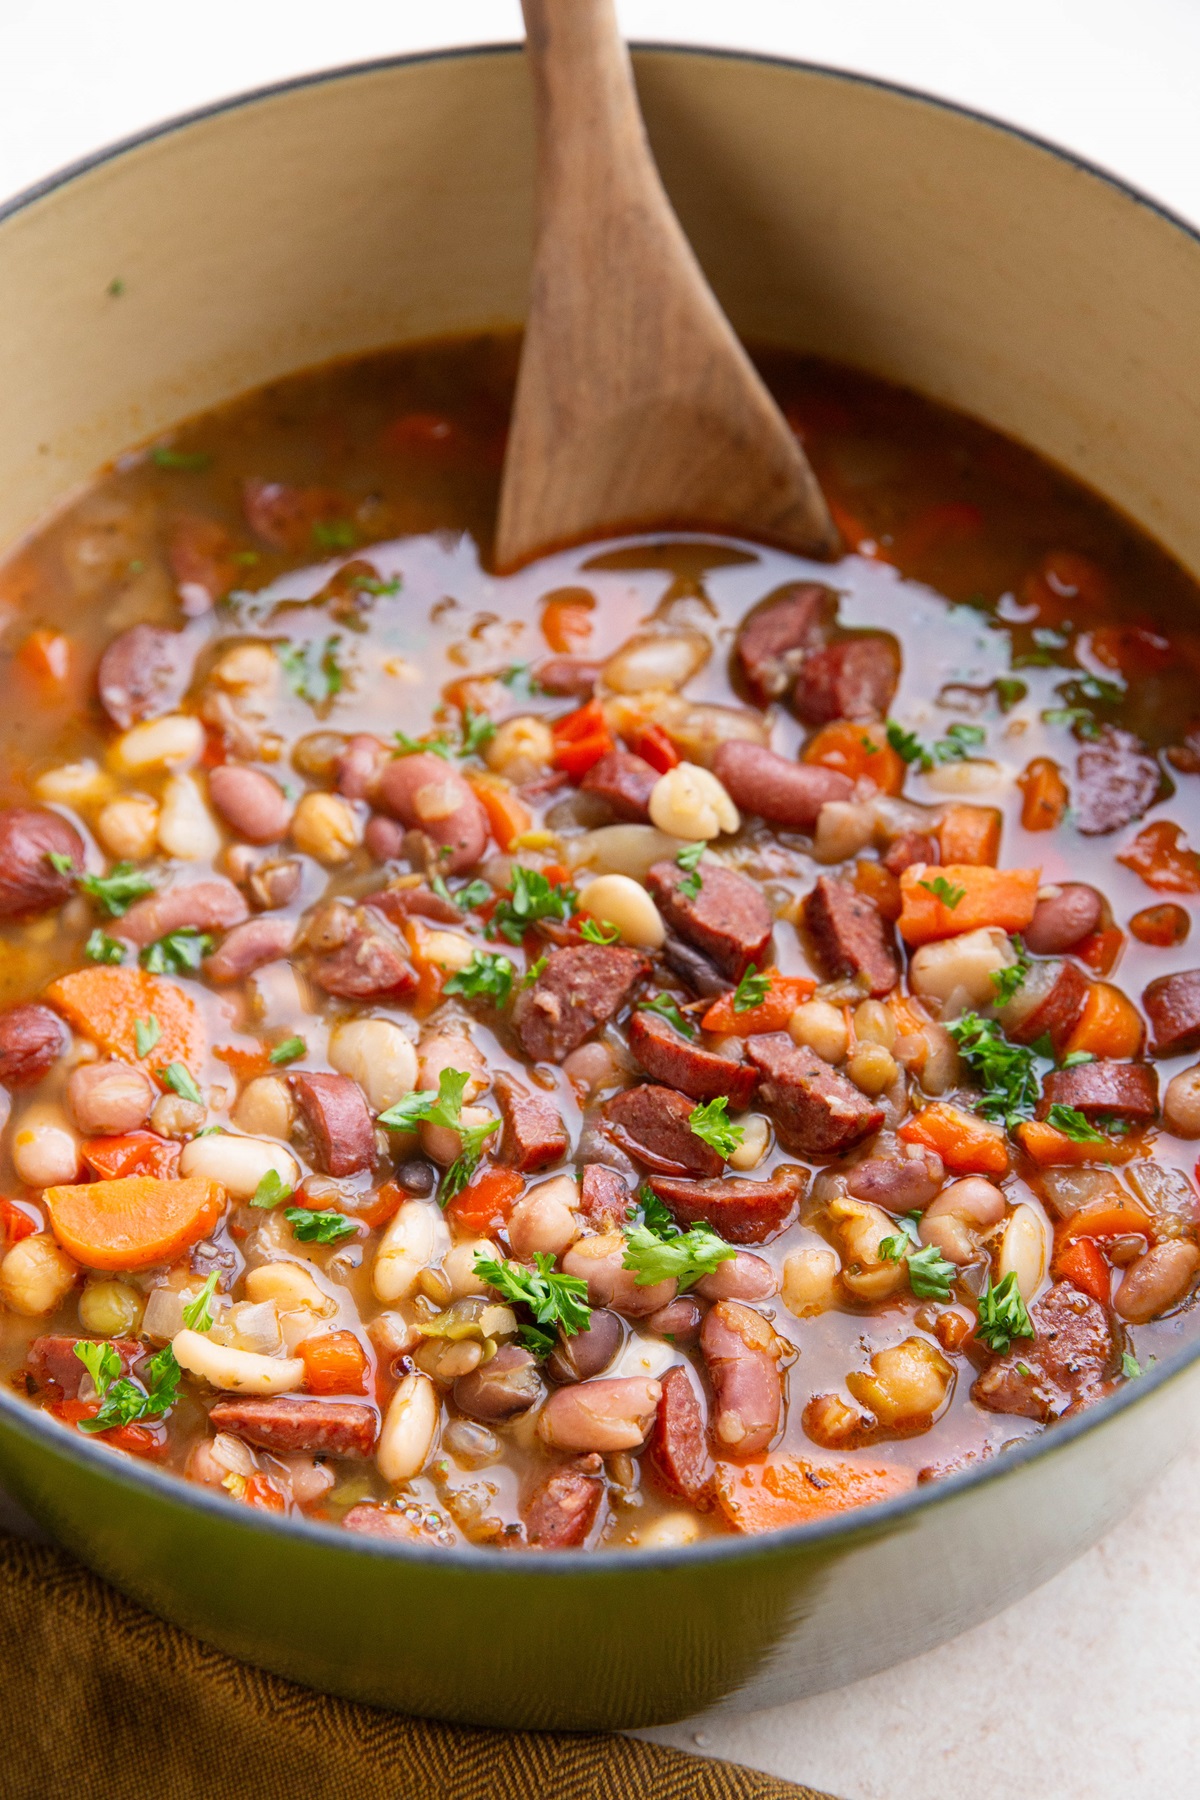 Sausage and bean soup in a large pot with a wooden spoon, ready to serve.